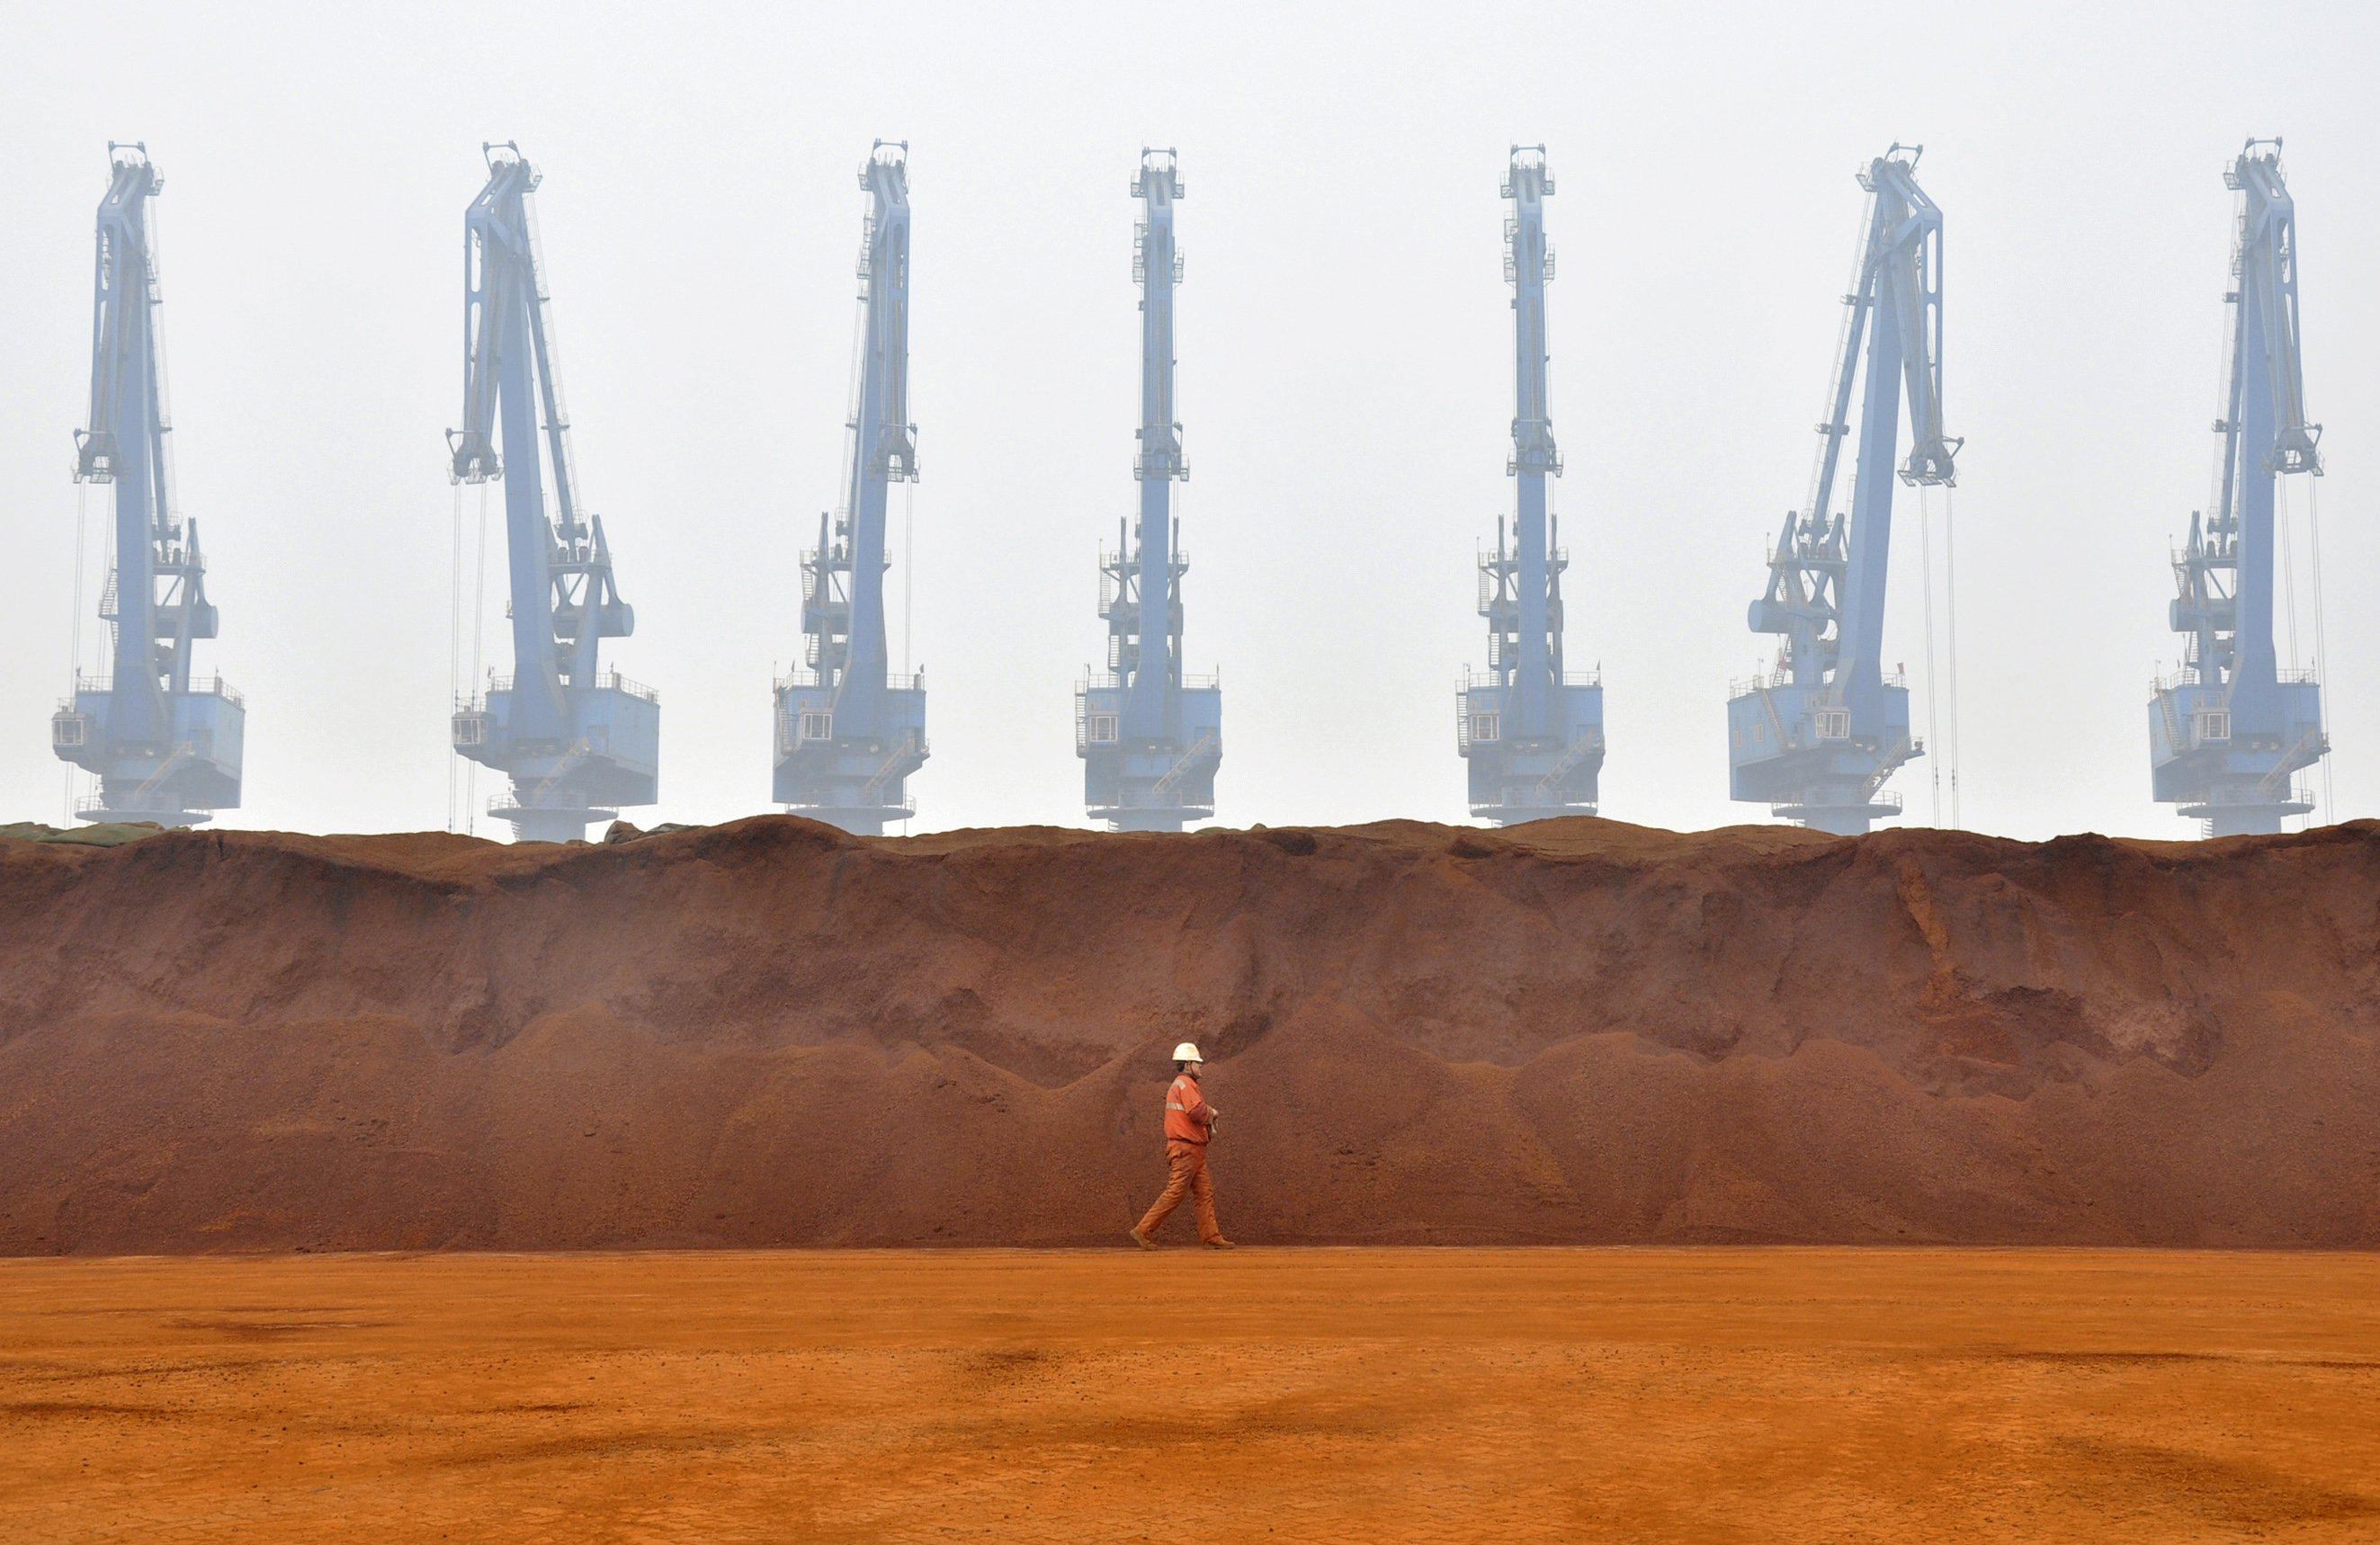 scmp.com - Bloomberg - China slump turns Fortescue from world-beating mining stock to big loser